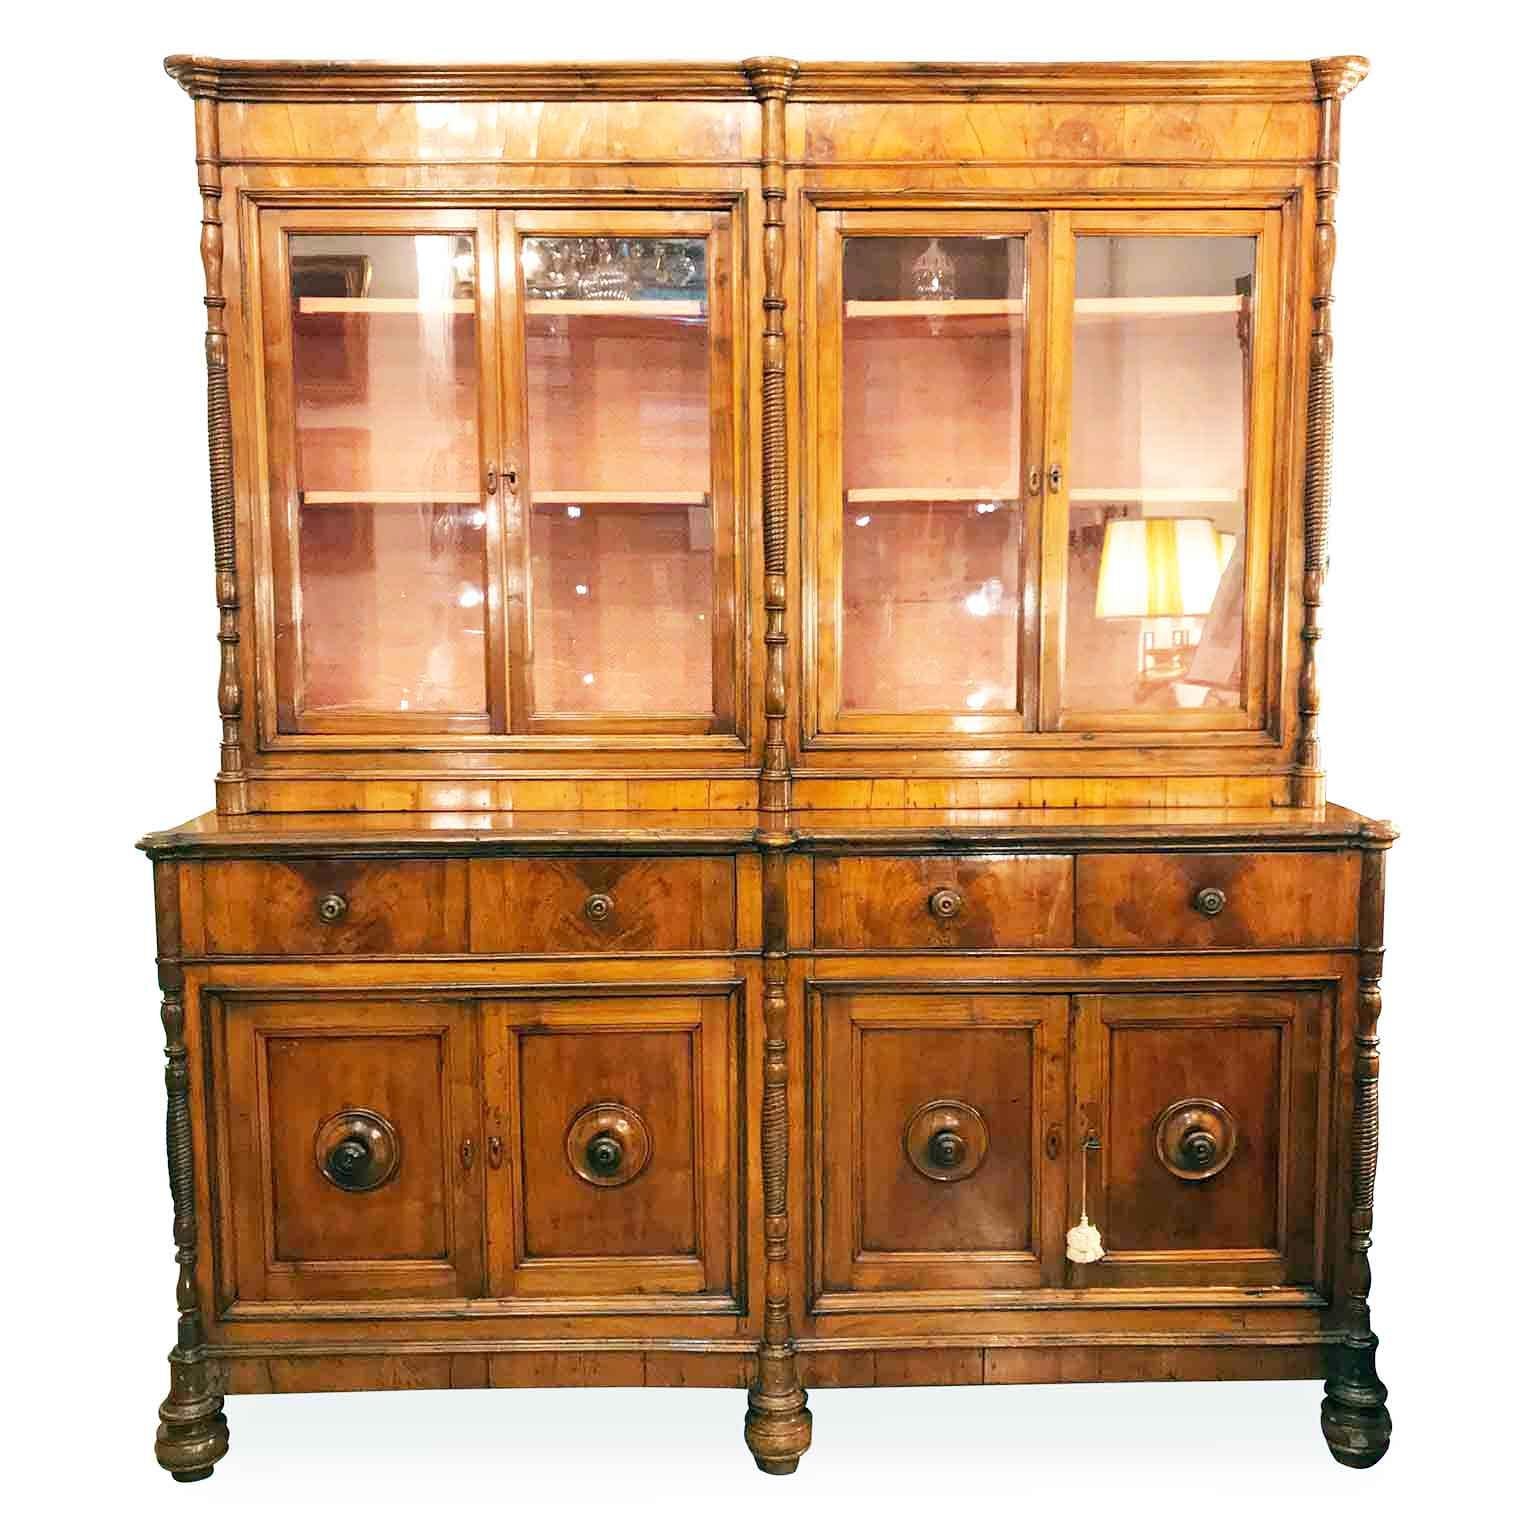 This stunning cherry four-door bookcase on cupboard dates back to mid-19th century, it is a two-part cabinet of Northern Italian, Lombard origin. 
It comes from a private villa in Milan and it is in good age related condition, with minor signs of